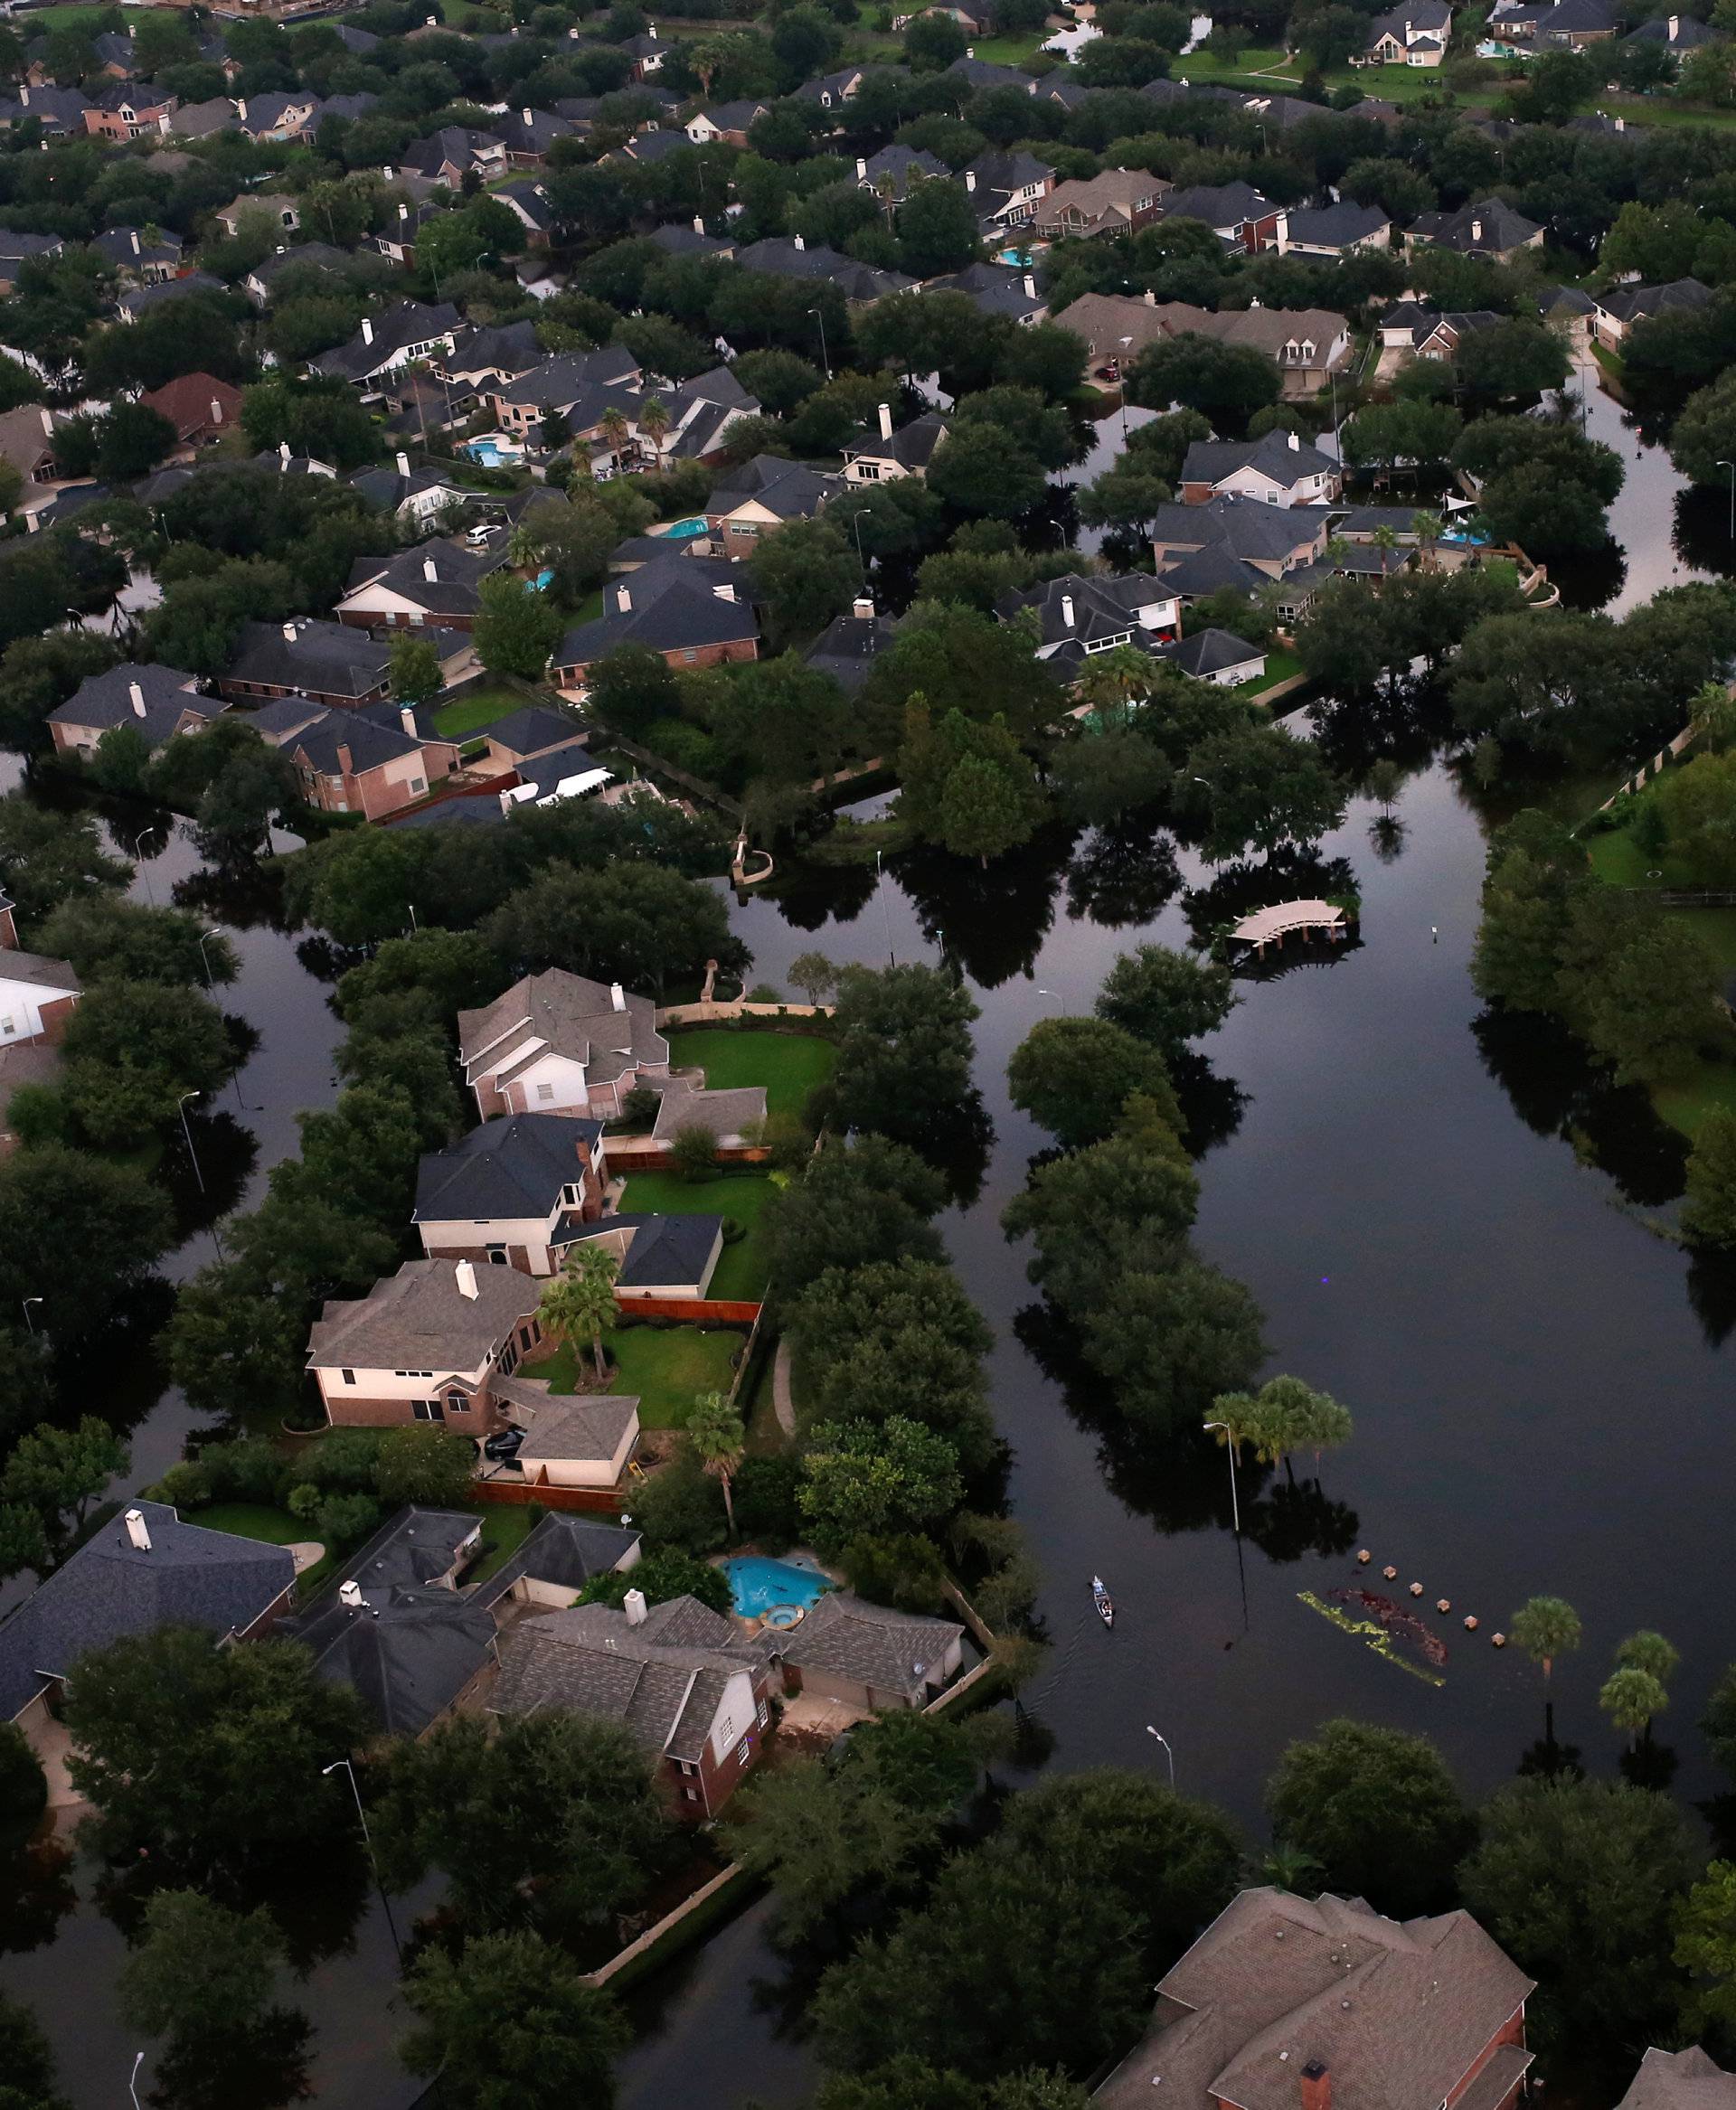 Houses are seen partially submerged in flood waters caused by Tropical Storm Harvey in Northwest Houston